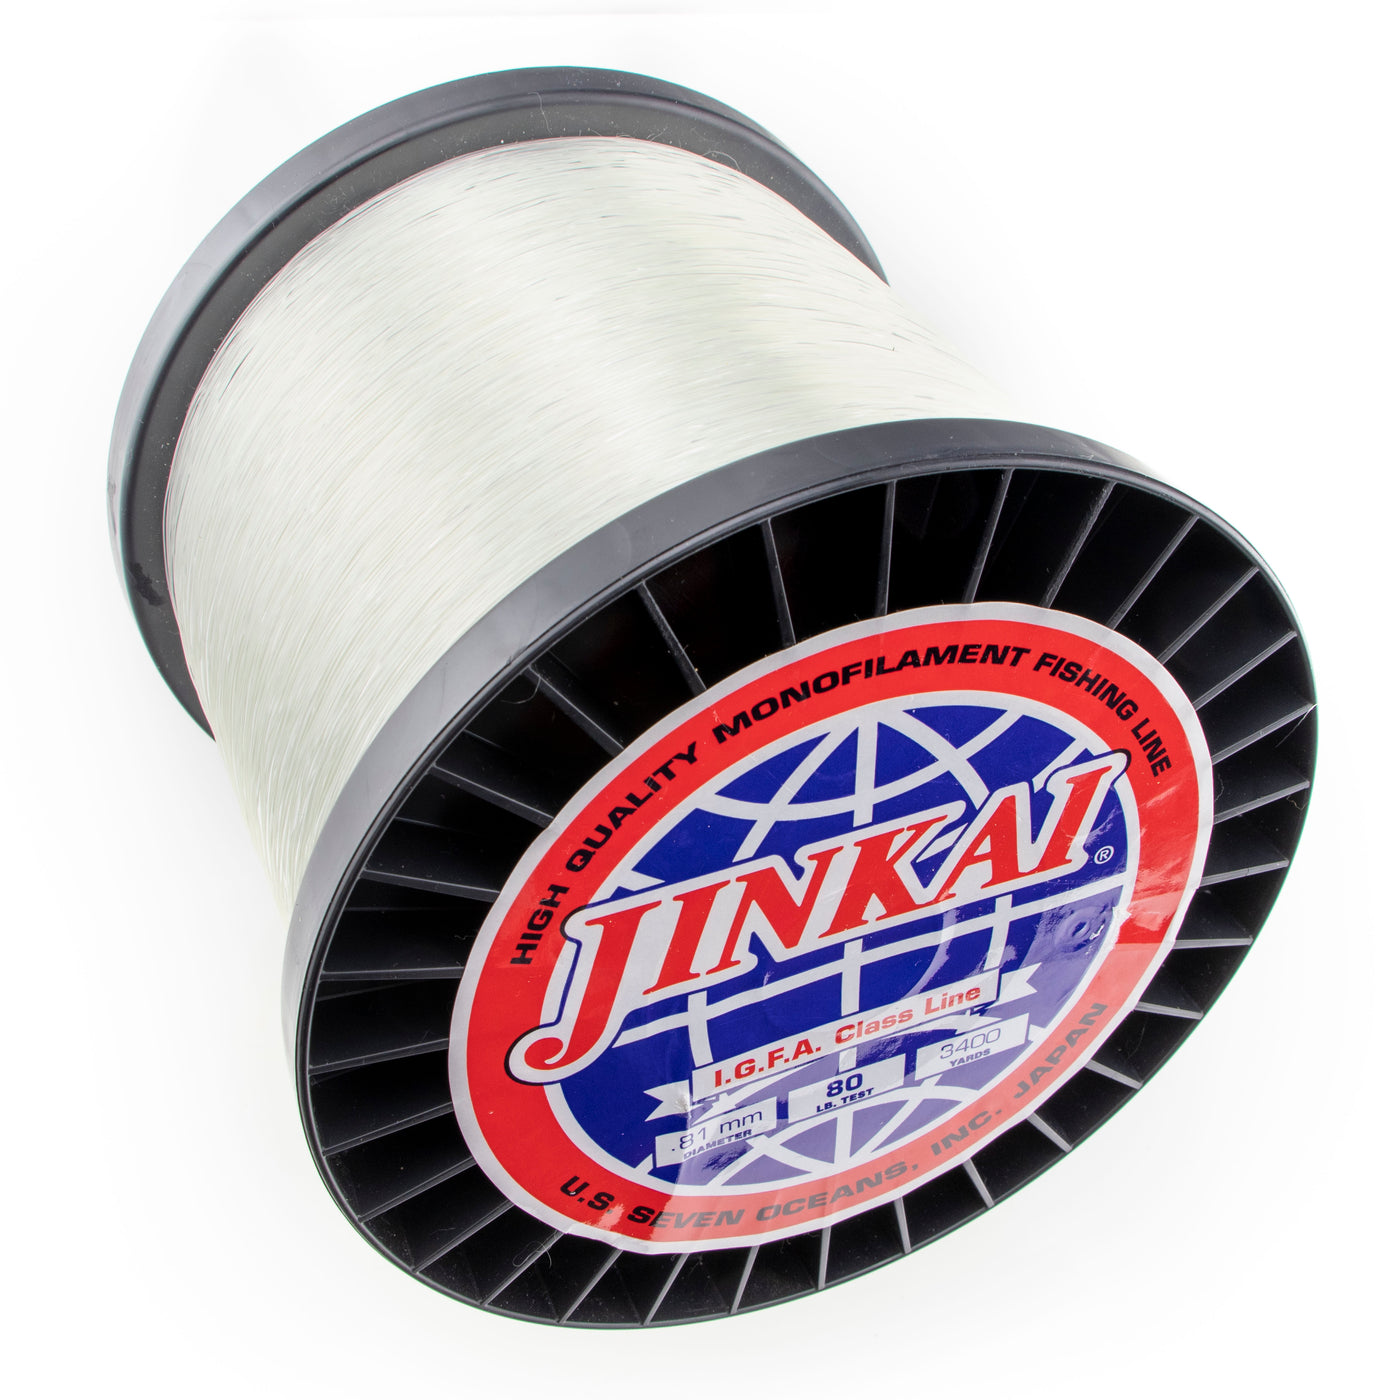 Monofilament Fishing Lines & Leaders 100 lb Line Weight Fishing